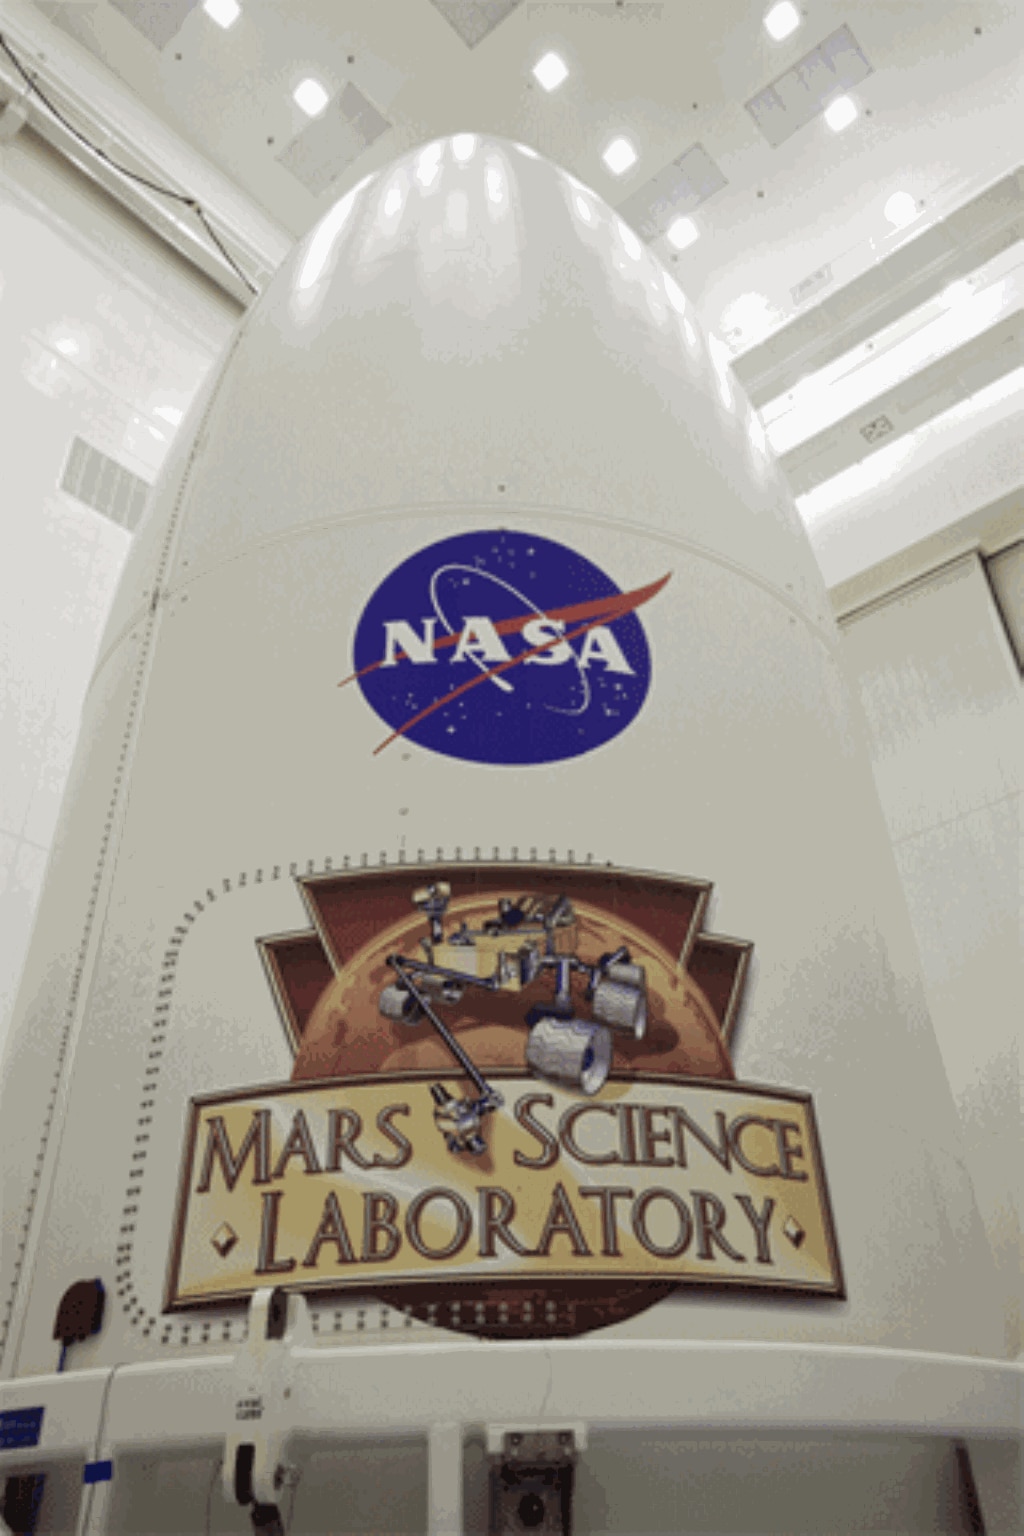 At NASA's Kennedy Space Center in Florida, an Atlas V rocket's payload container bears the NASA logo above the Mars Science Laboratory (MSL) logo. (NASA Rover)